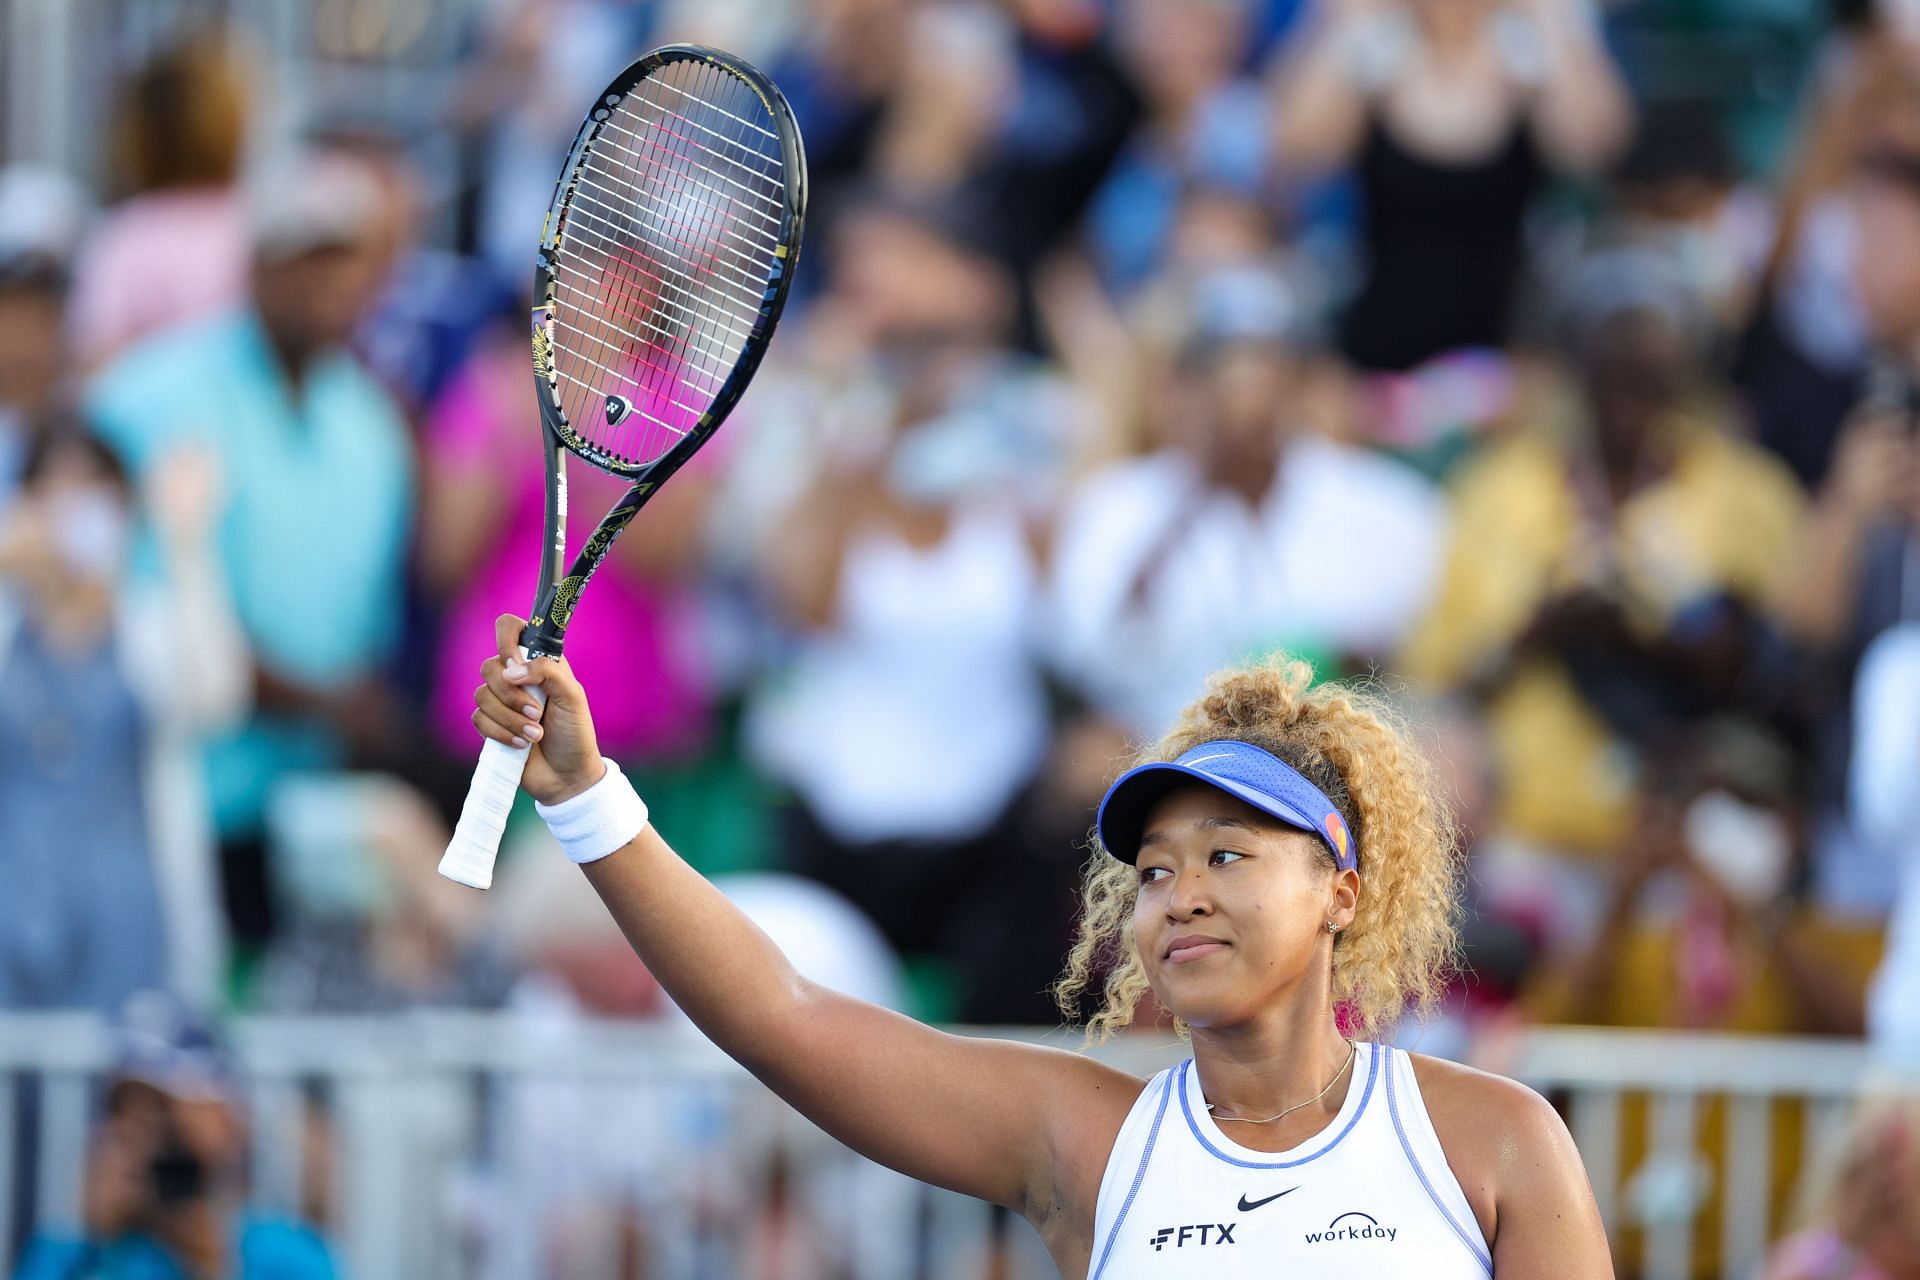 Naomi Osaka acknowledges the crowd after her victory.